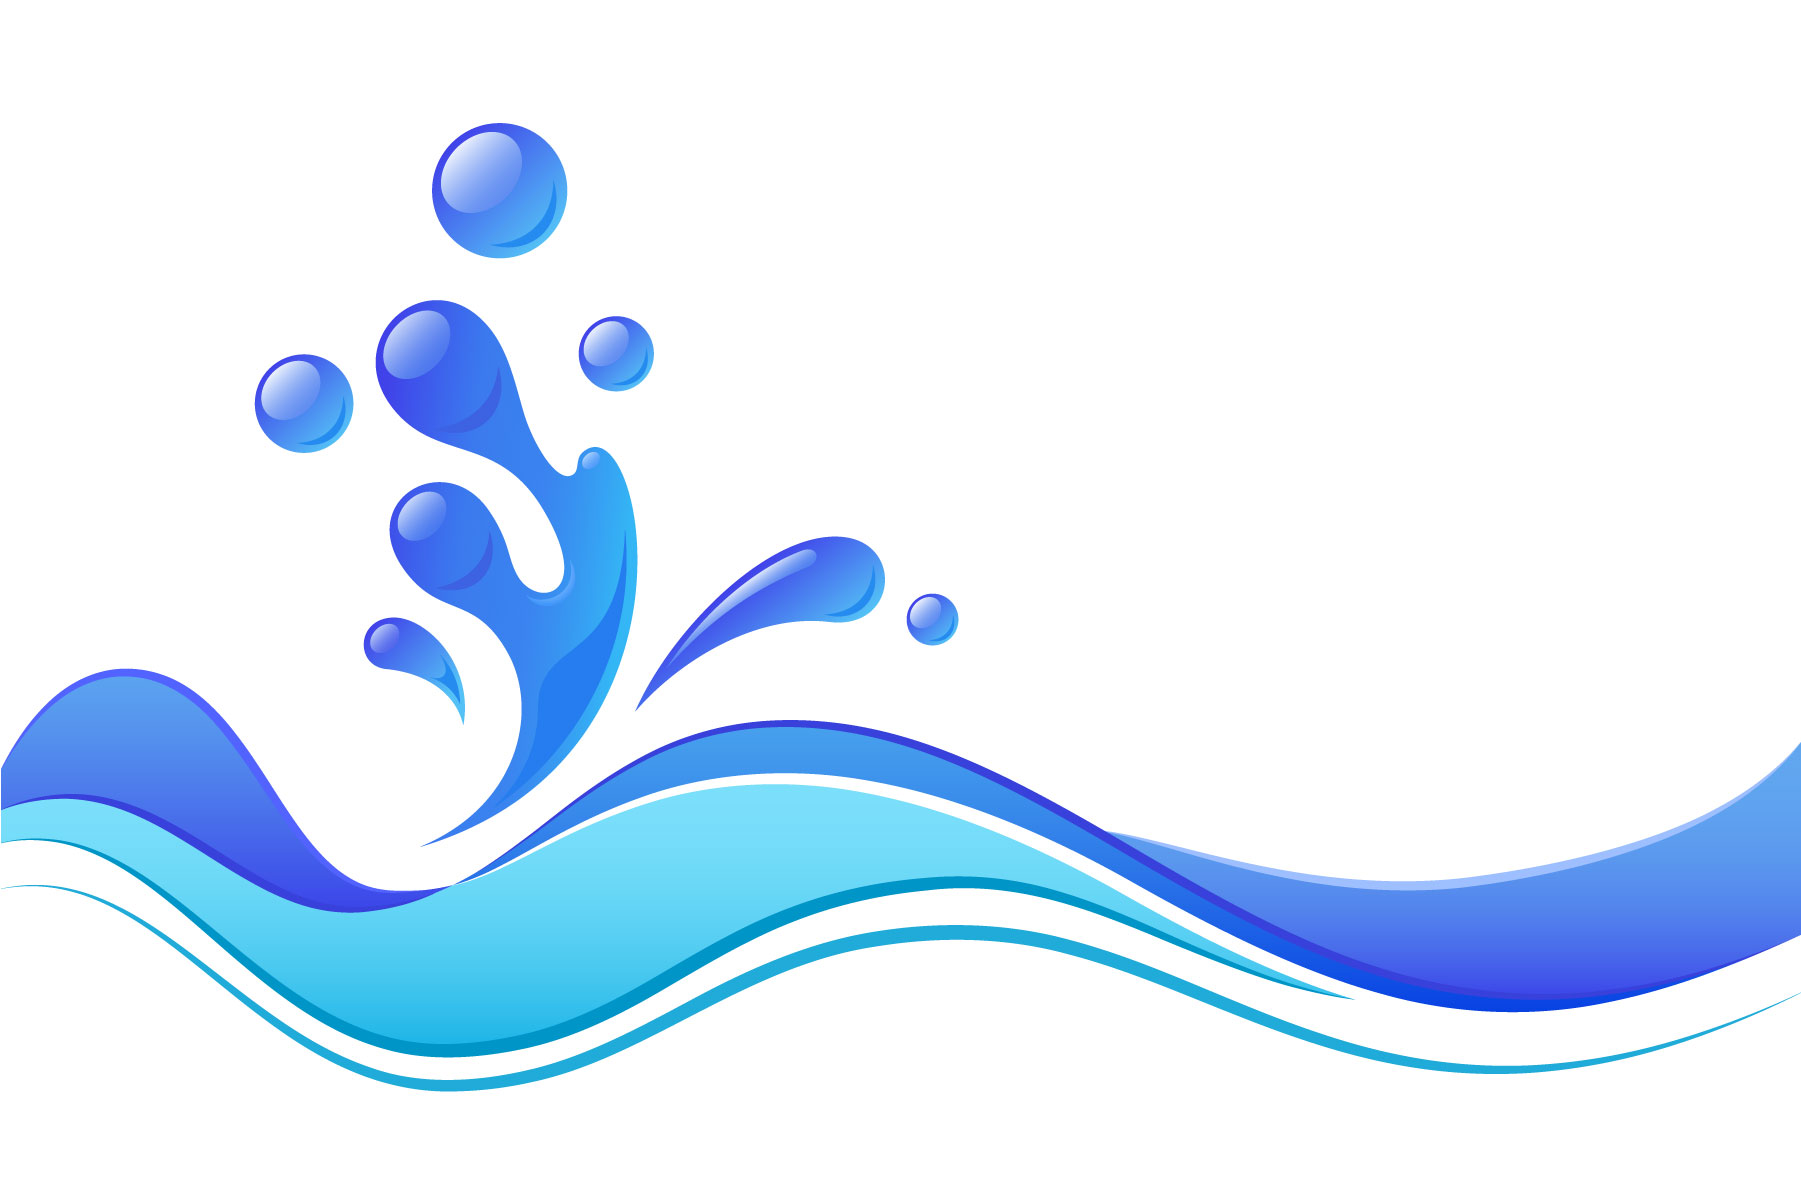 Water Splash Clipart Png | Clipart library - Free Clipart Images